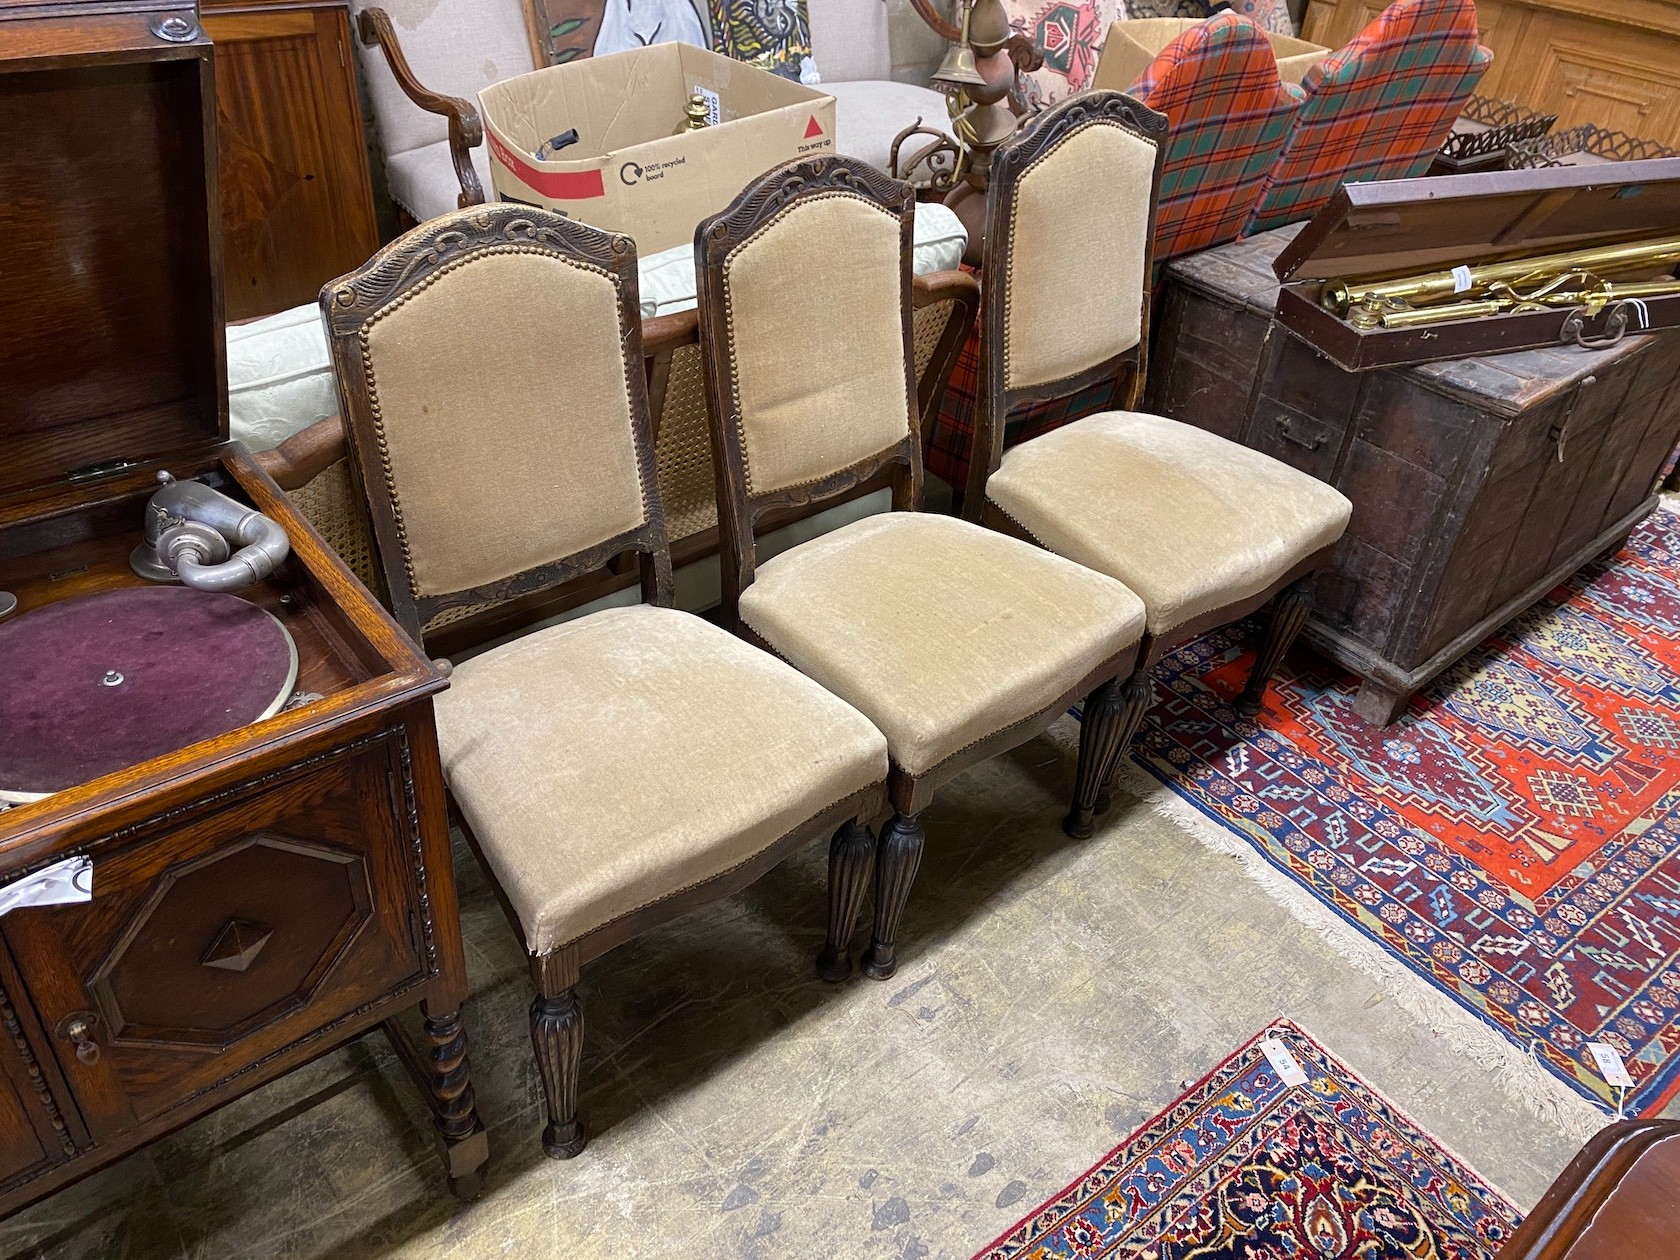 Three continental oak dining chairs